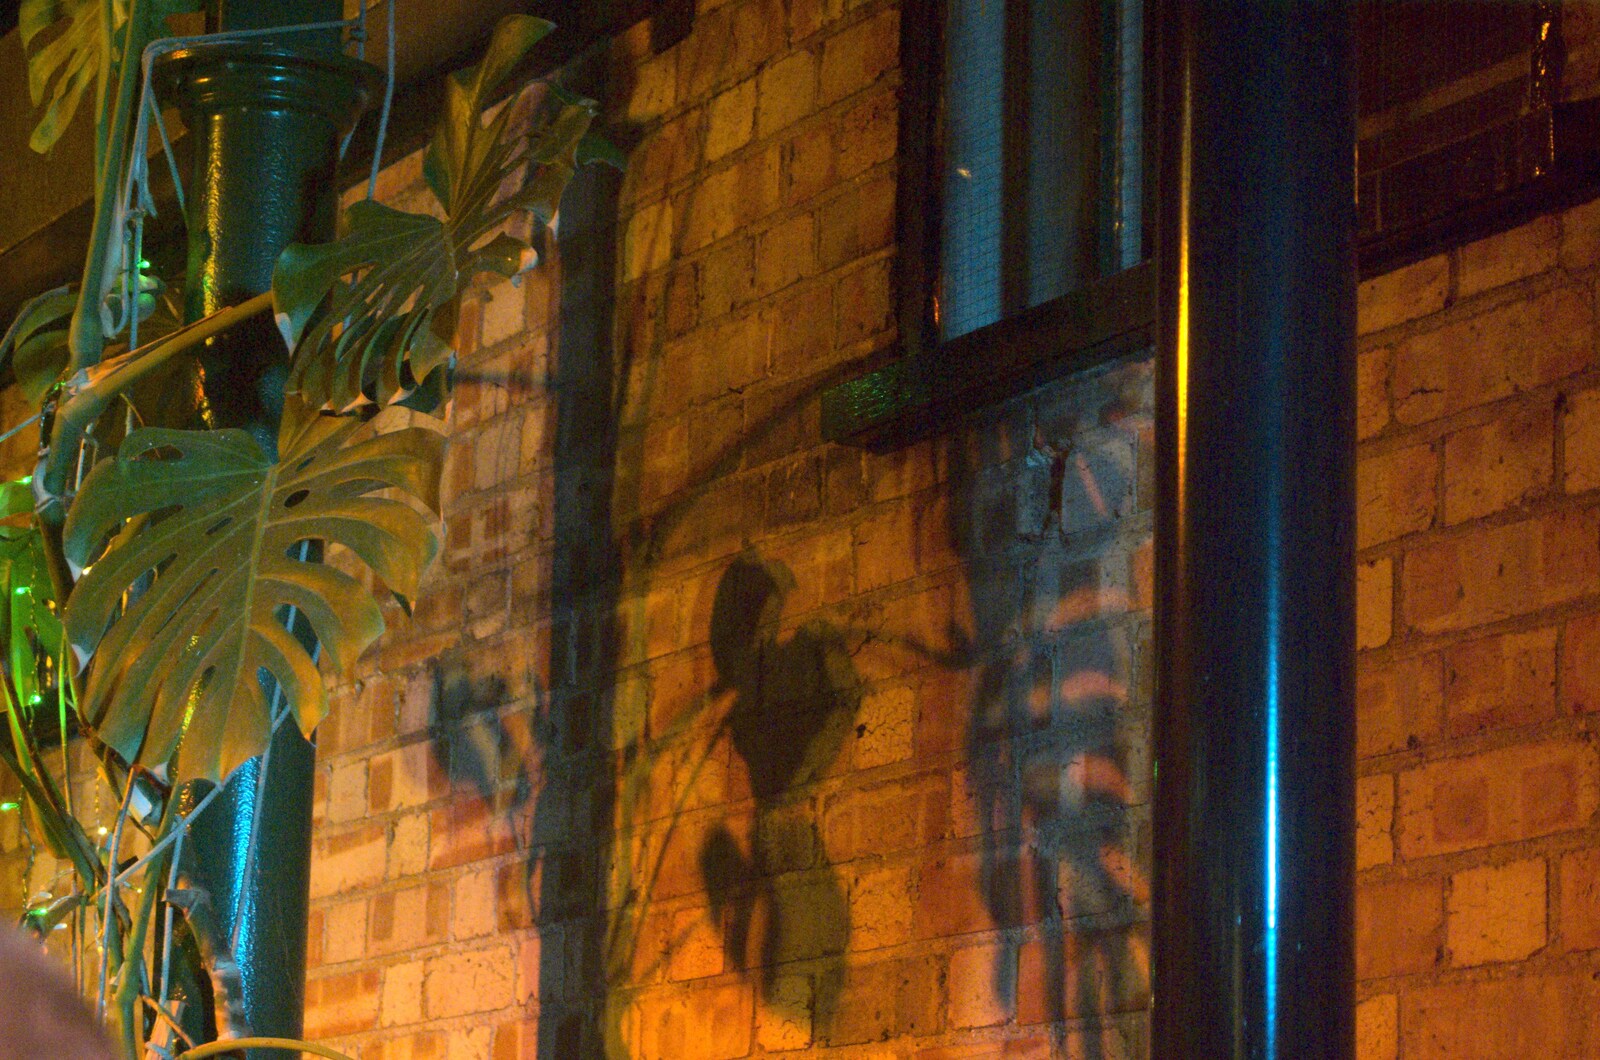 Swiss-cheese-plant shadows on the wall from Apple Pressing and Amandine's Jazz, Diss, Norfolk - 21st November 2010